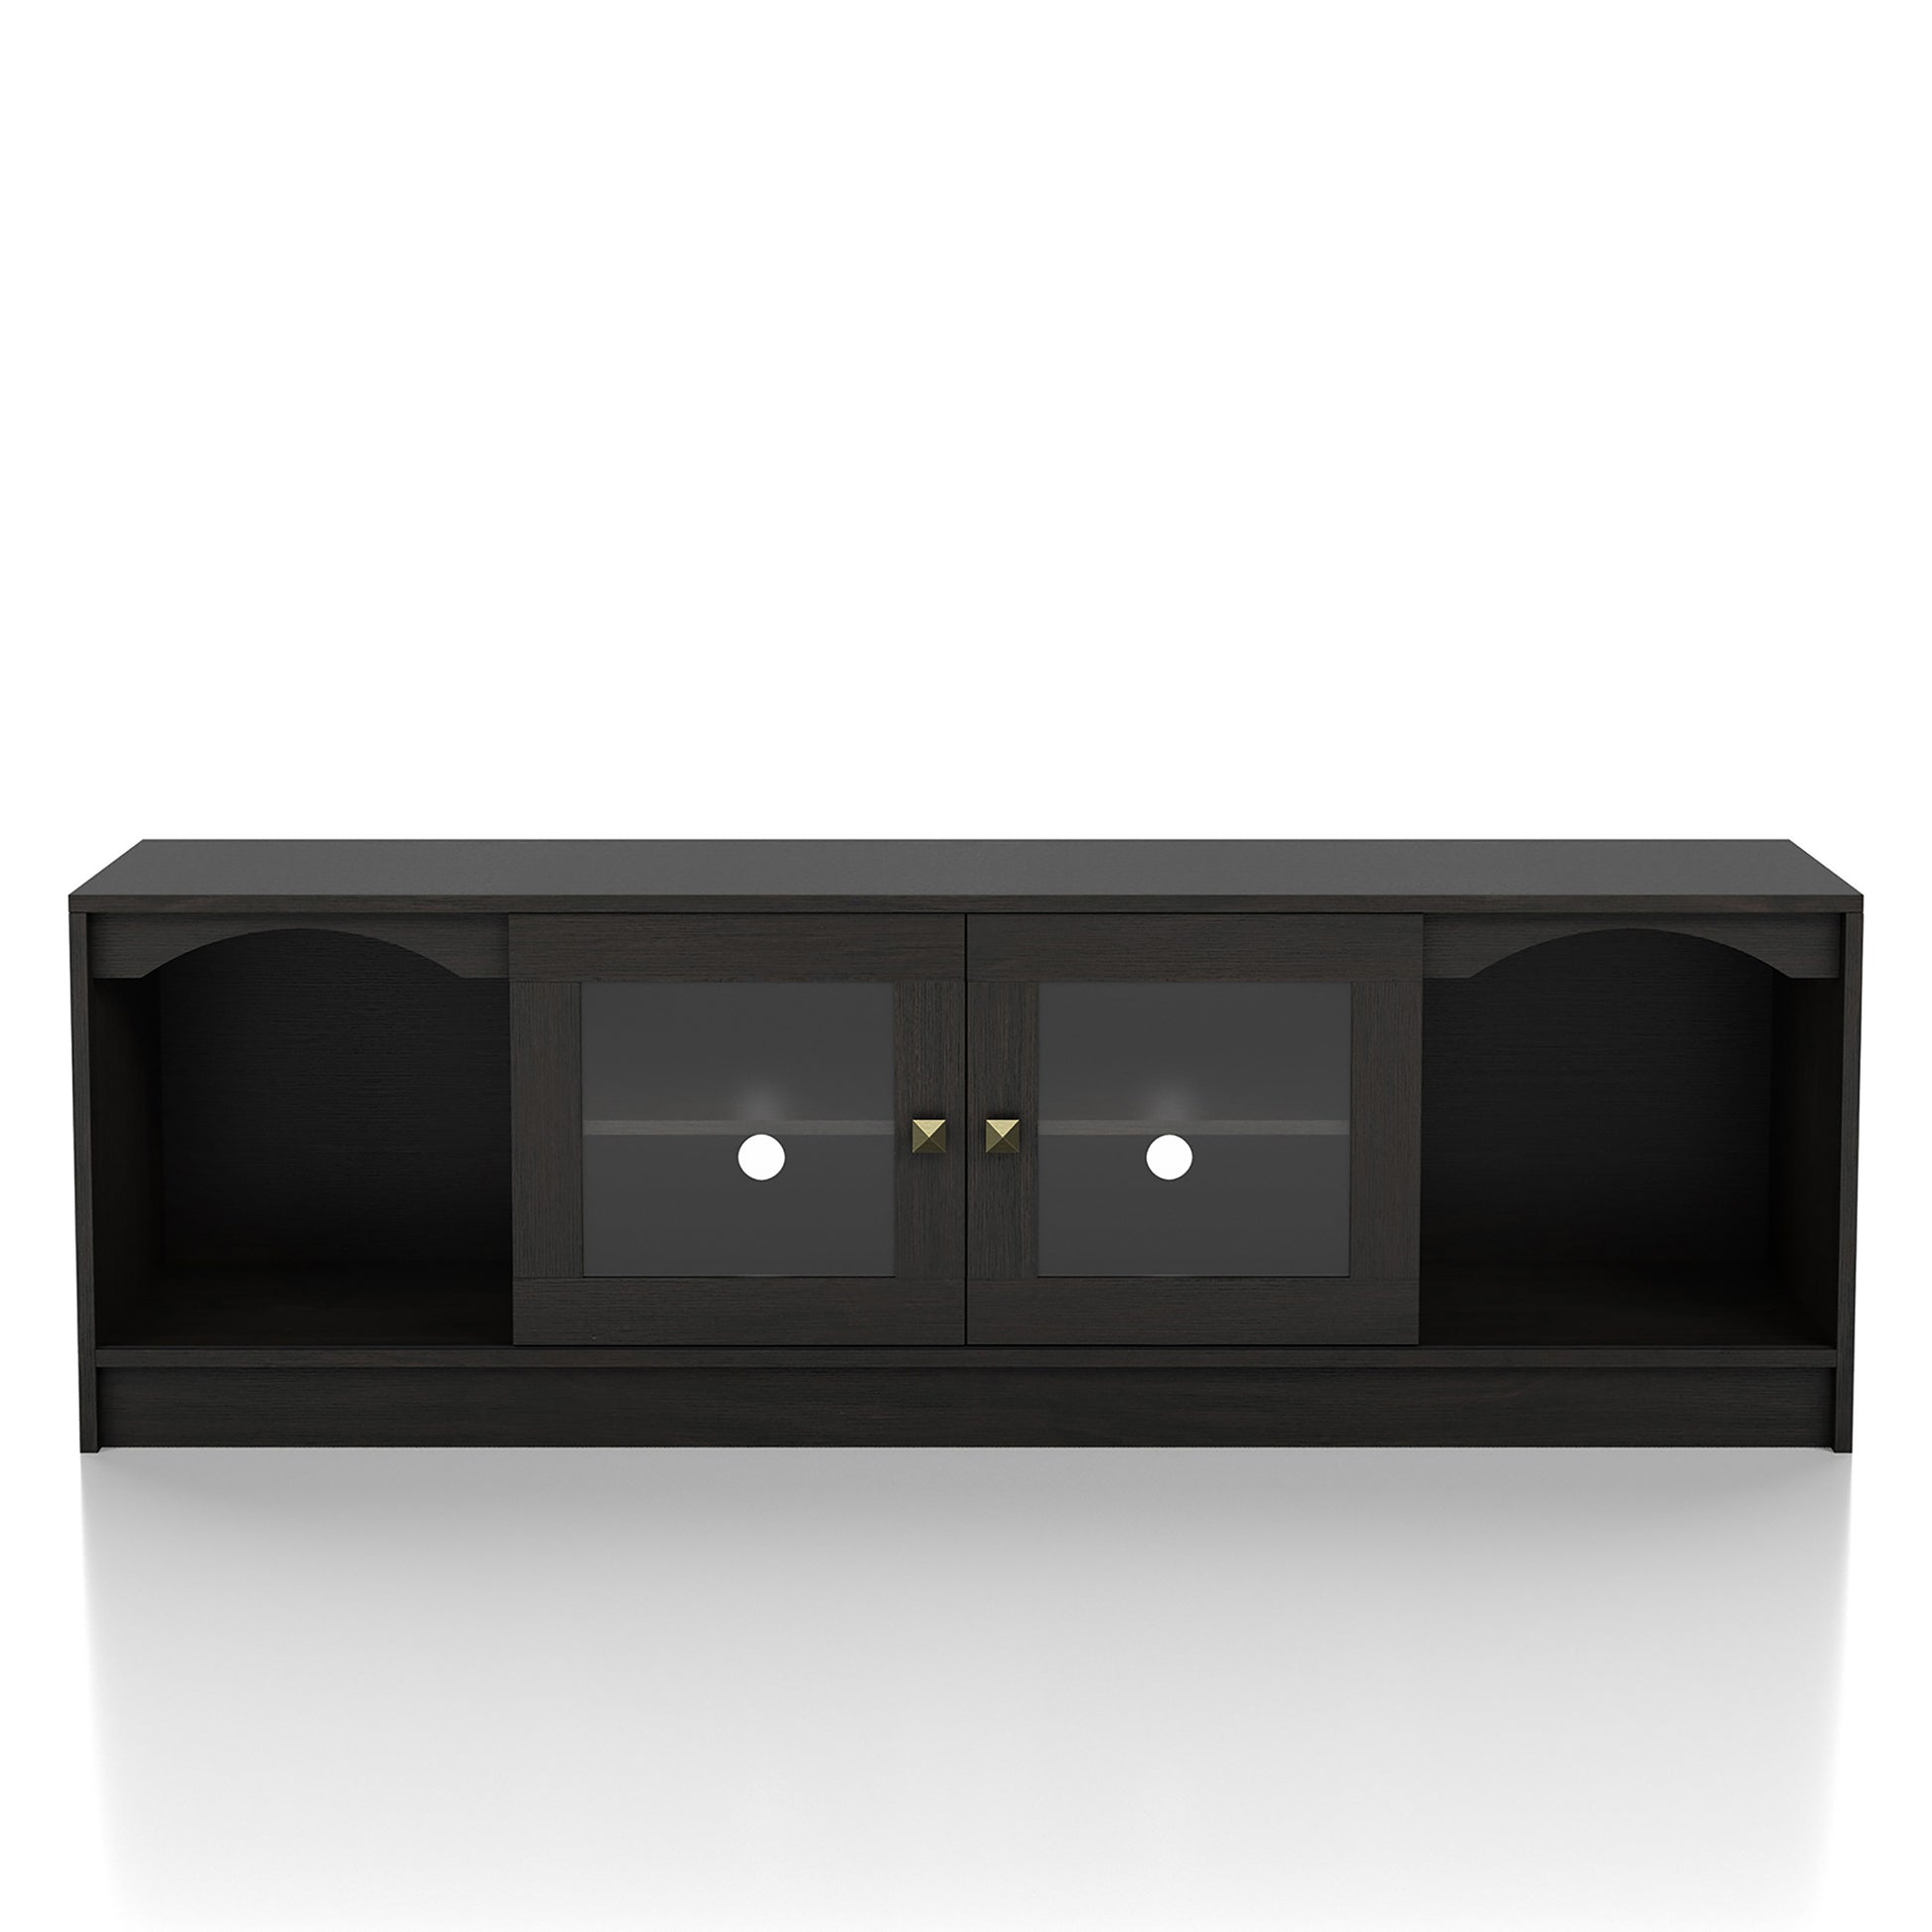 Front-facing transitional espresso two-sliding door TV stand on a white background